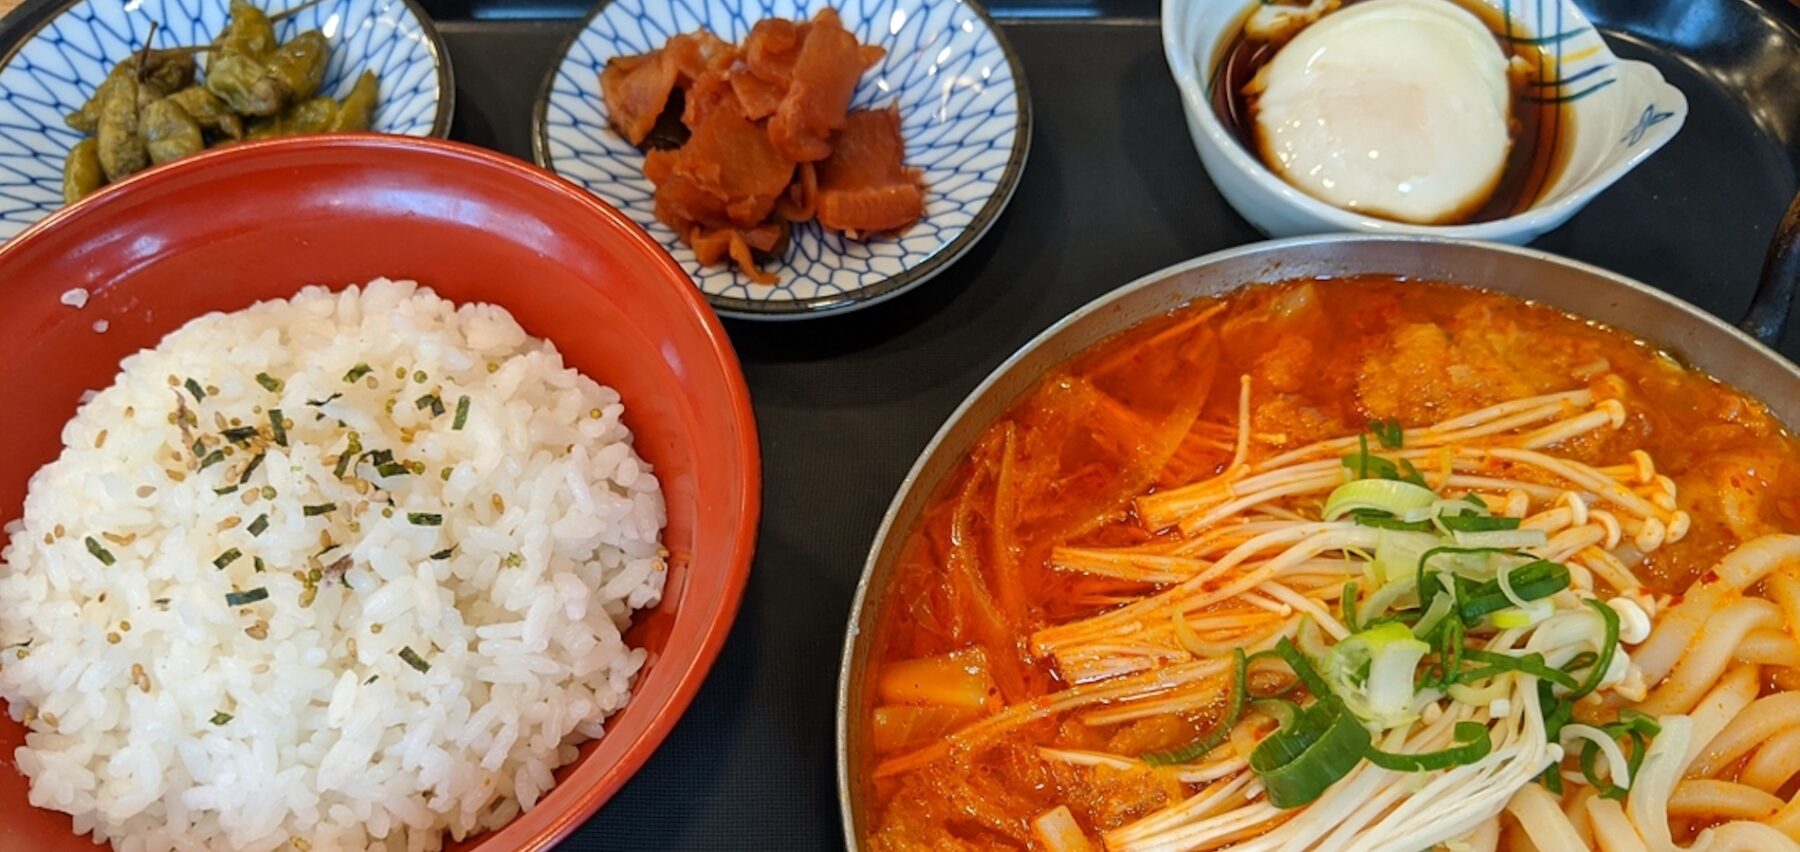 Spicy udon soup with rice